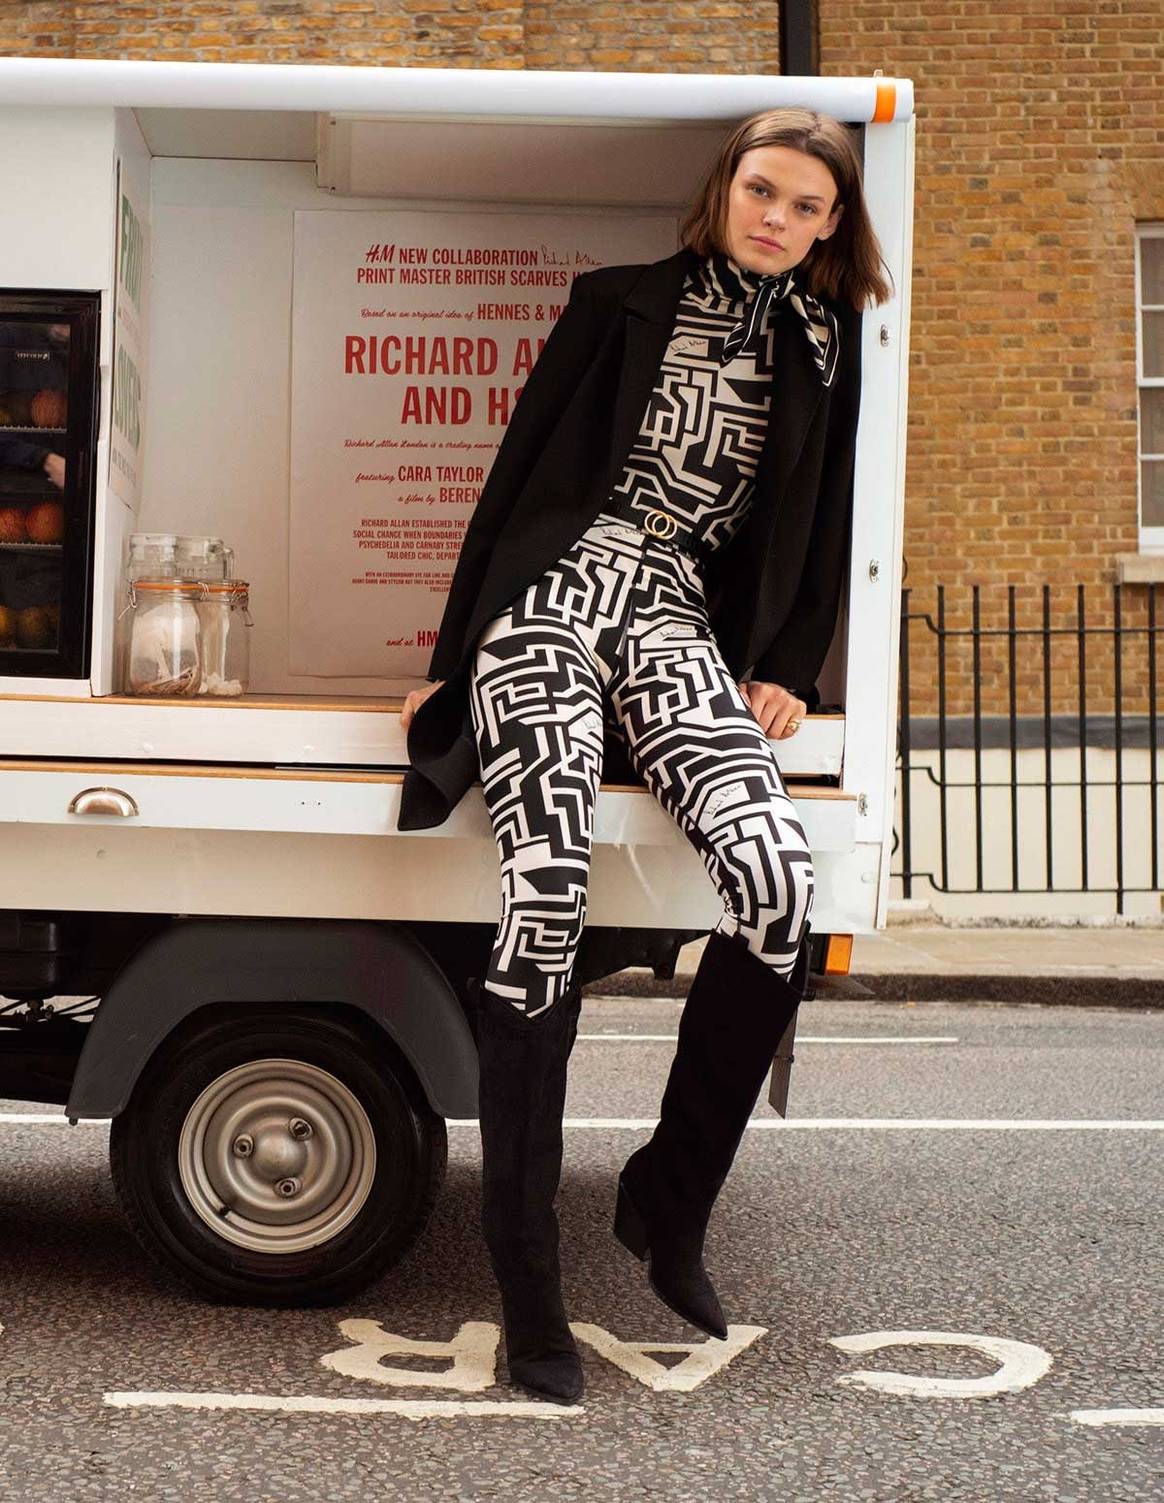 H&M collaborates with Richard Allan for 1960s-inspired womenswear collection